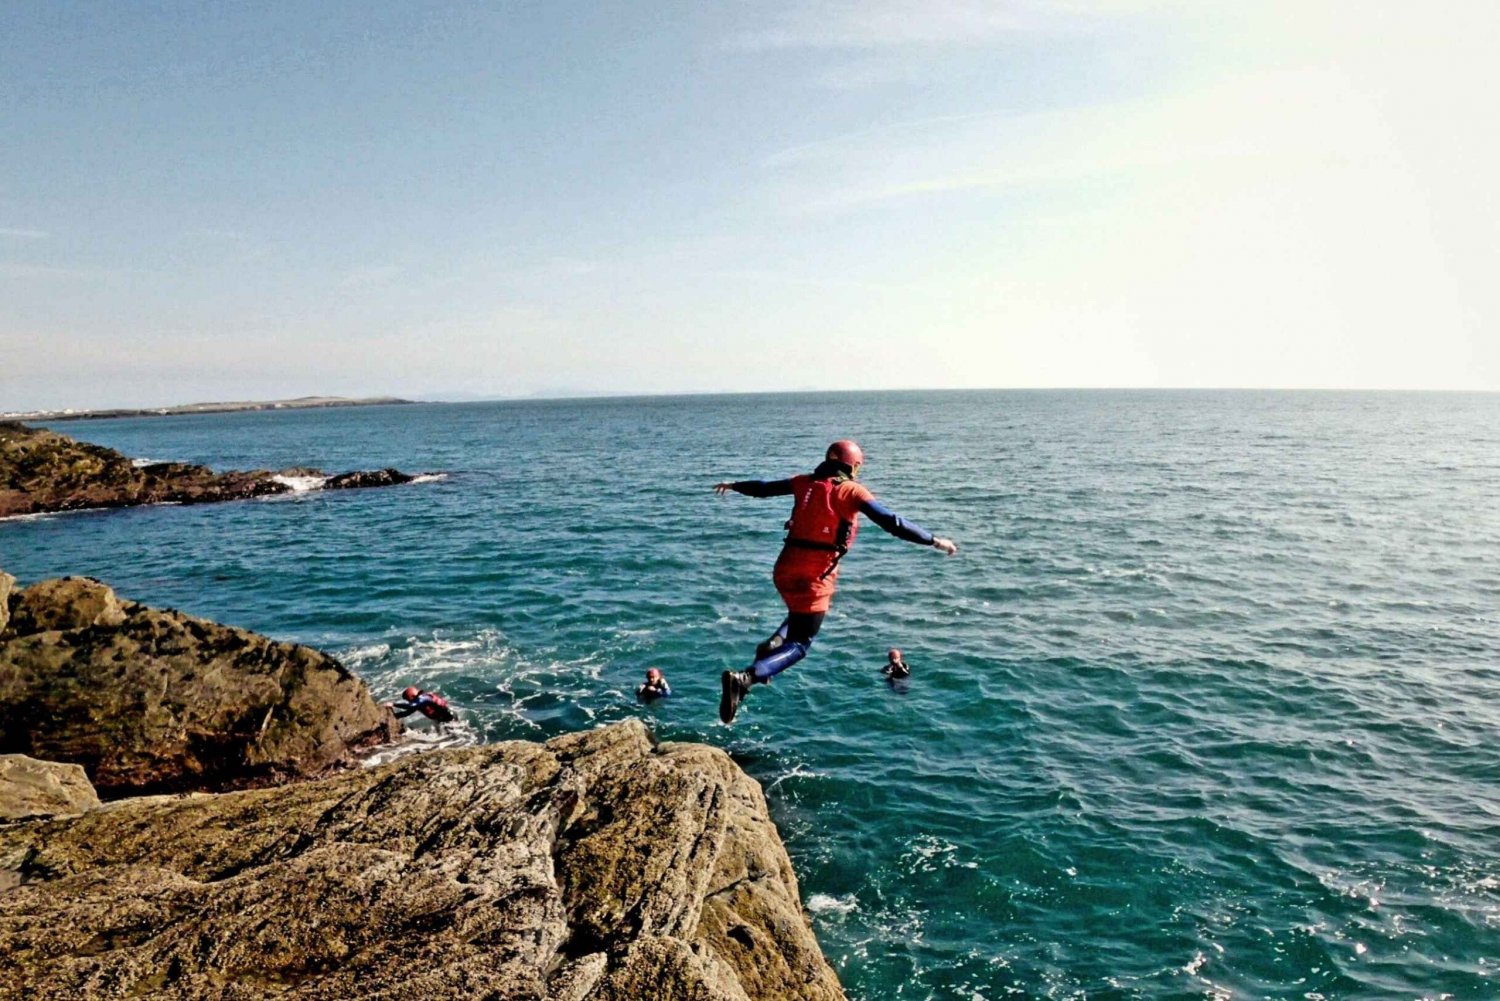 Coasteering on Anglesey (cliff jumping, climbing, swimming)